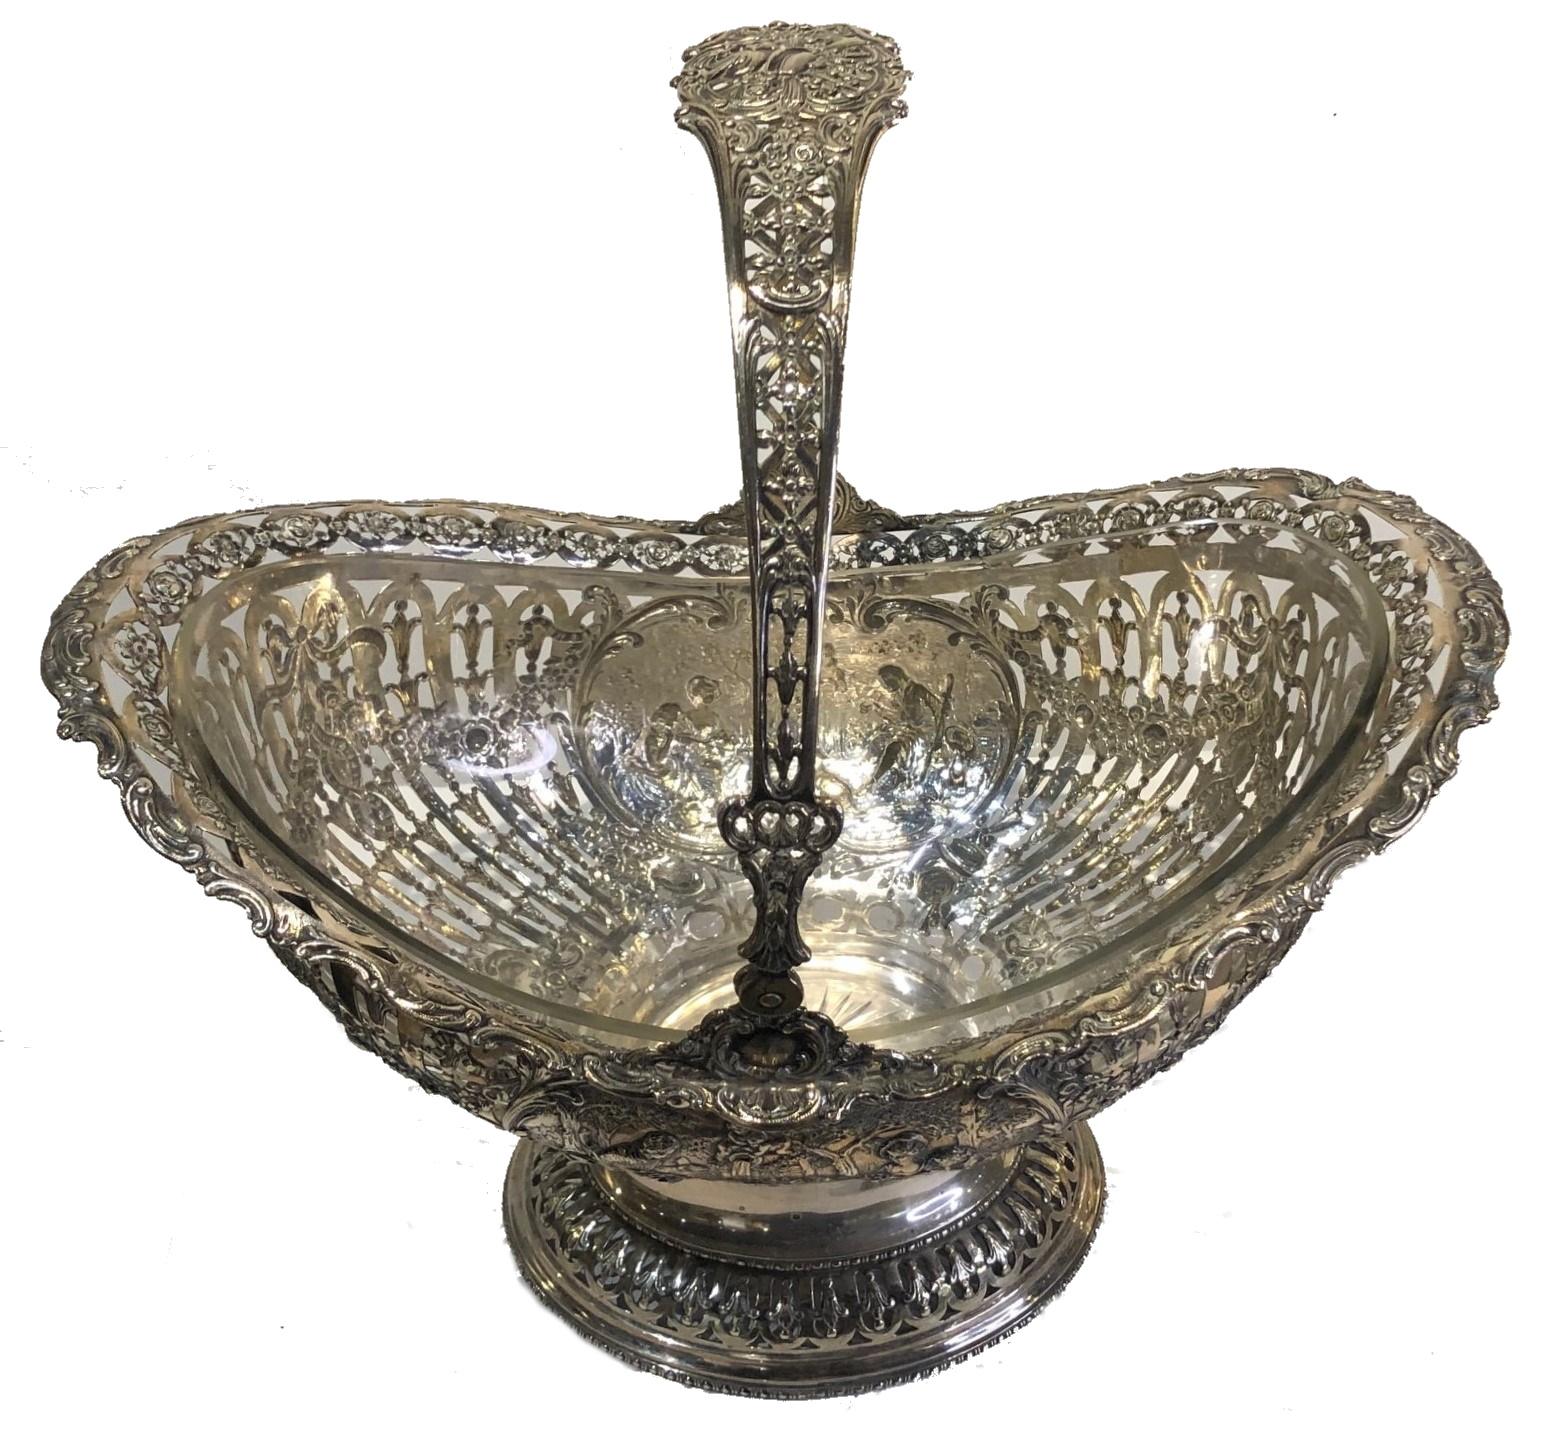 Antique
Silver Fruit Serving Basket w/ Glass Insert
Germany, Late XIX Century

DIMENSIONS
Height: 15.5 inches            Width: 15 inches            Depth: 10 inches

WEIGHT
44oz (1,383g)

ABOUT
Extremely meticulous silversmith workmanship and rich